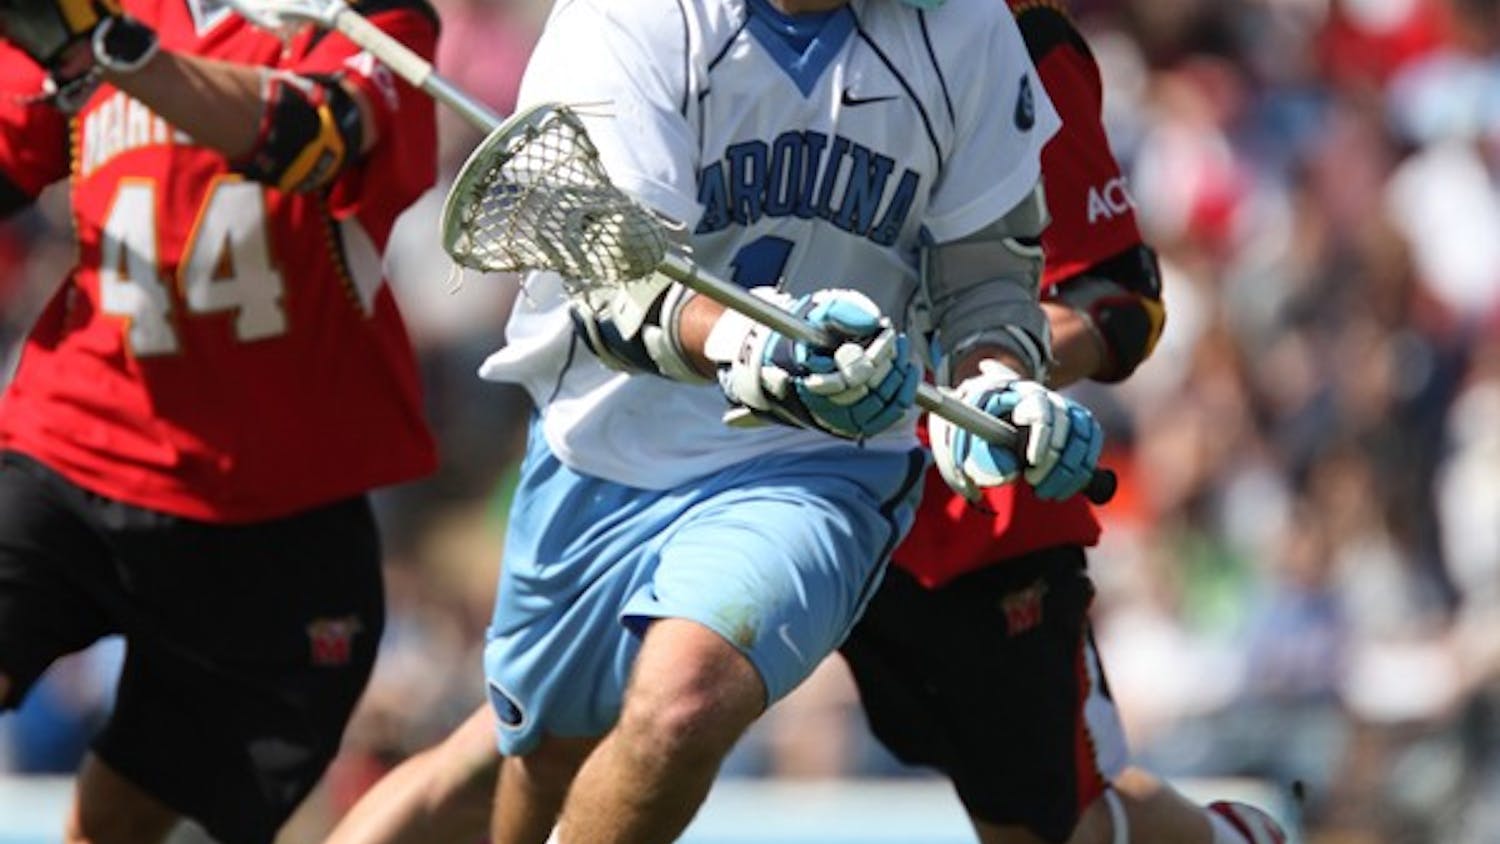 Freshman Marcus Holman stepped in for injured Billy Bitter to lead UNC’s offense with four goals and one assist. DTH/Phong Dinh